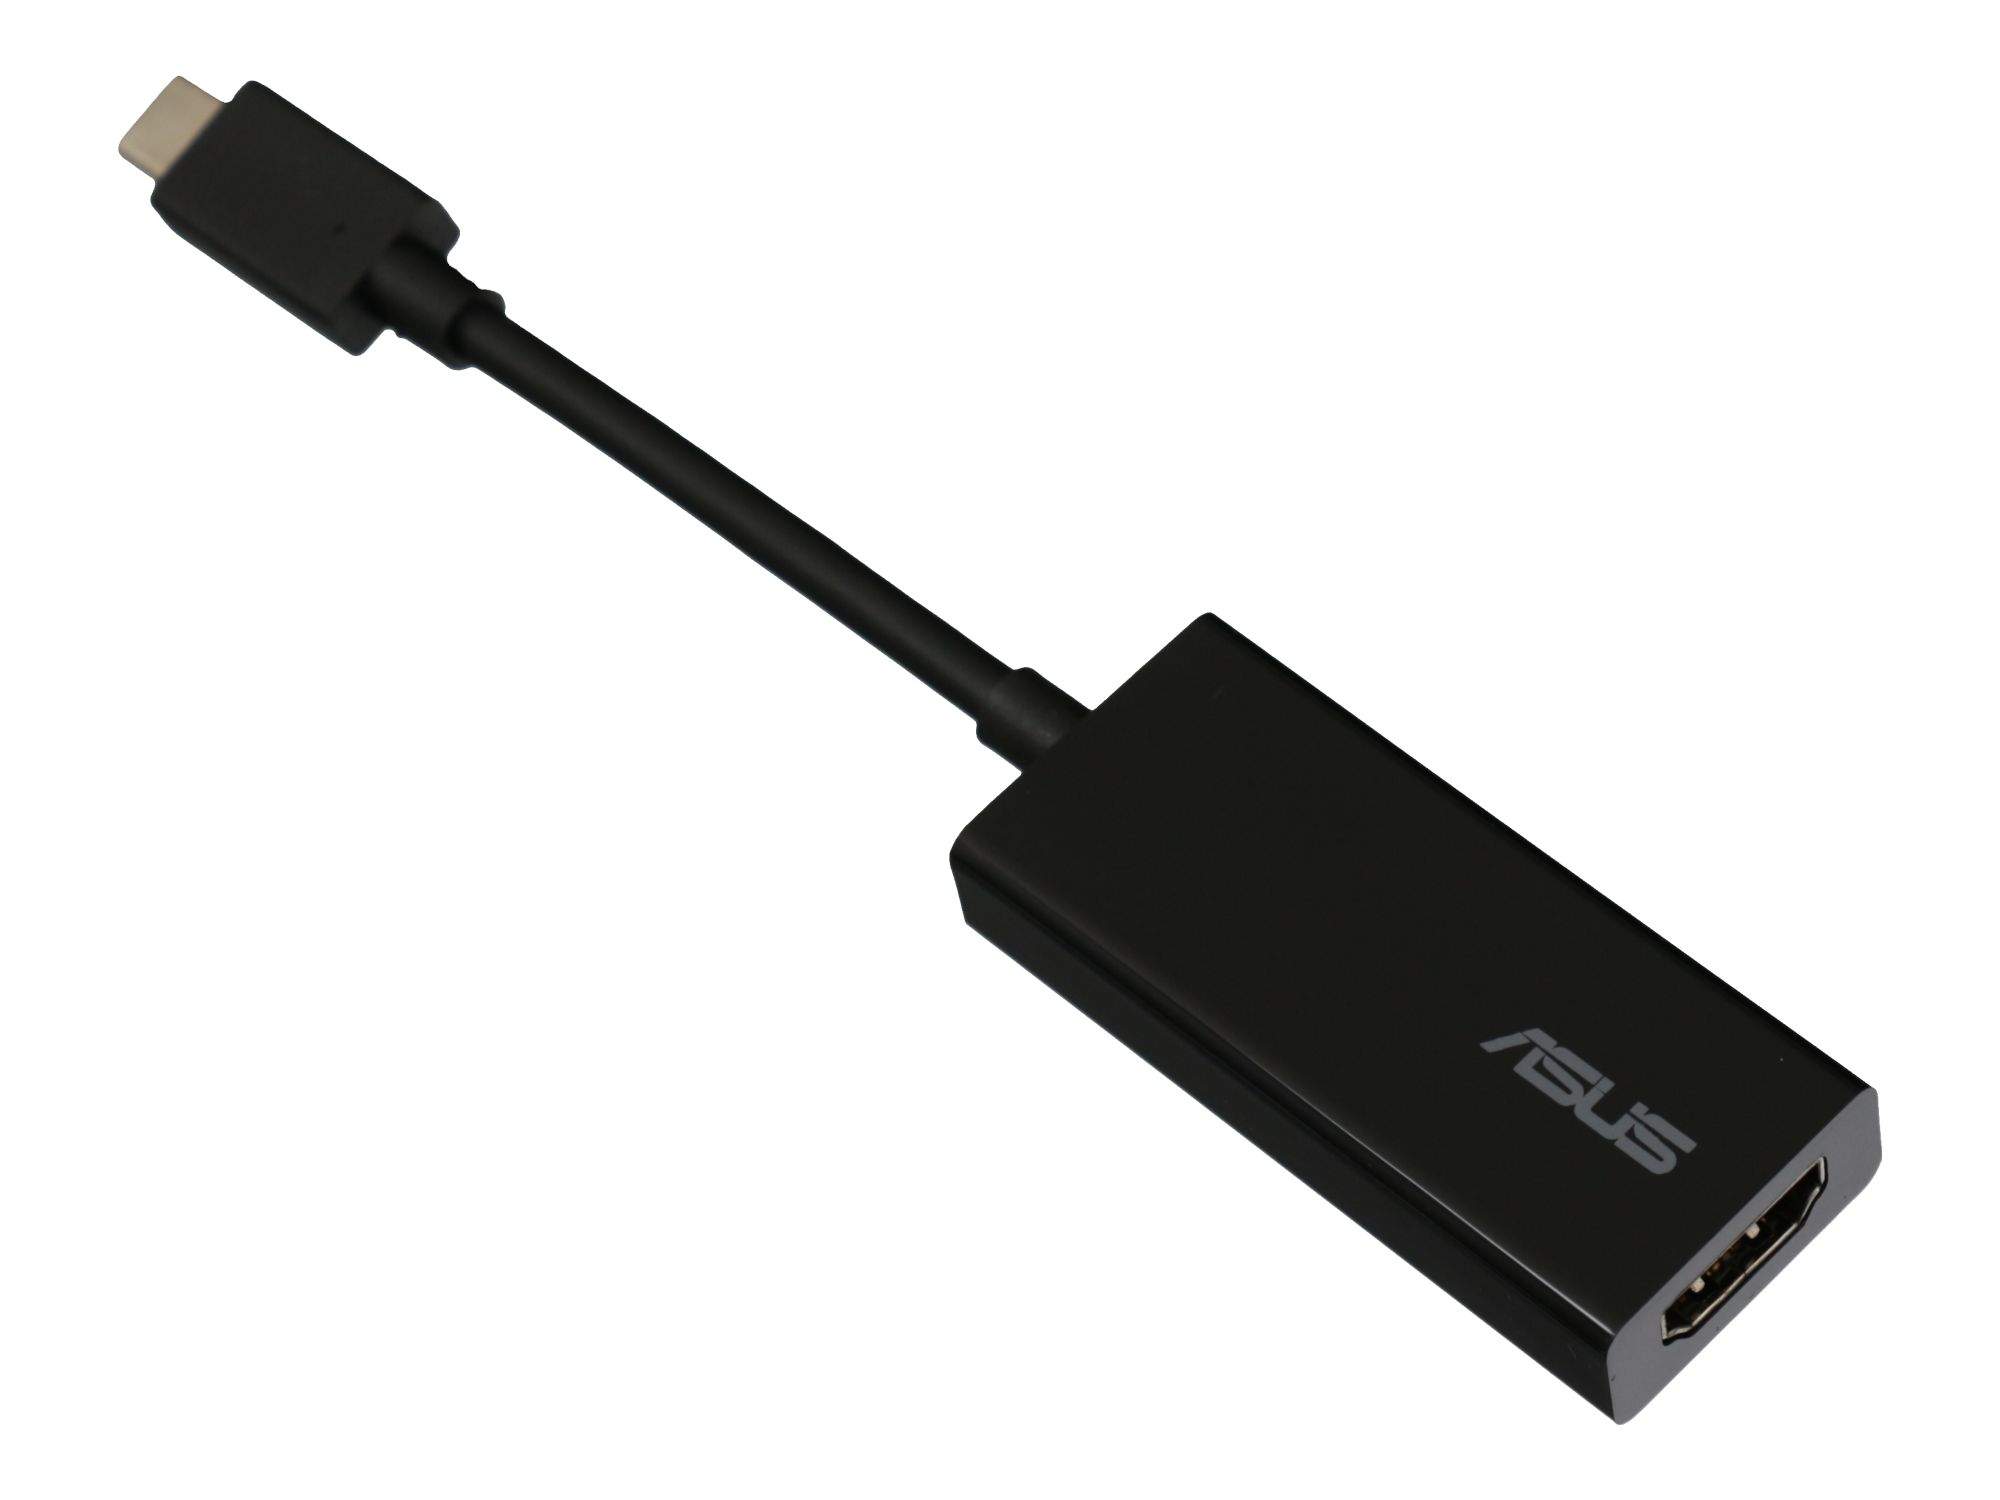 ASUS USB C TO HDMI2.0 DONGLE